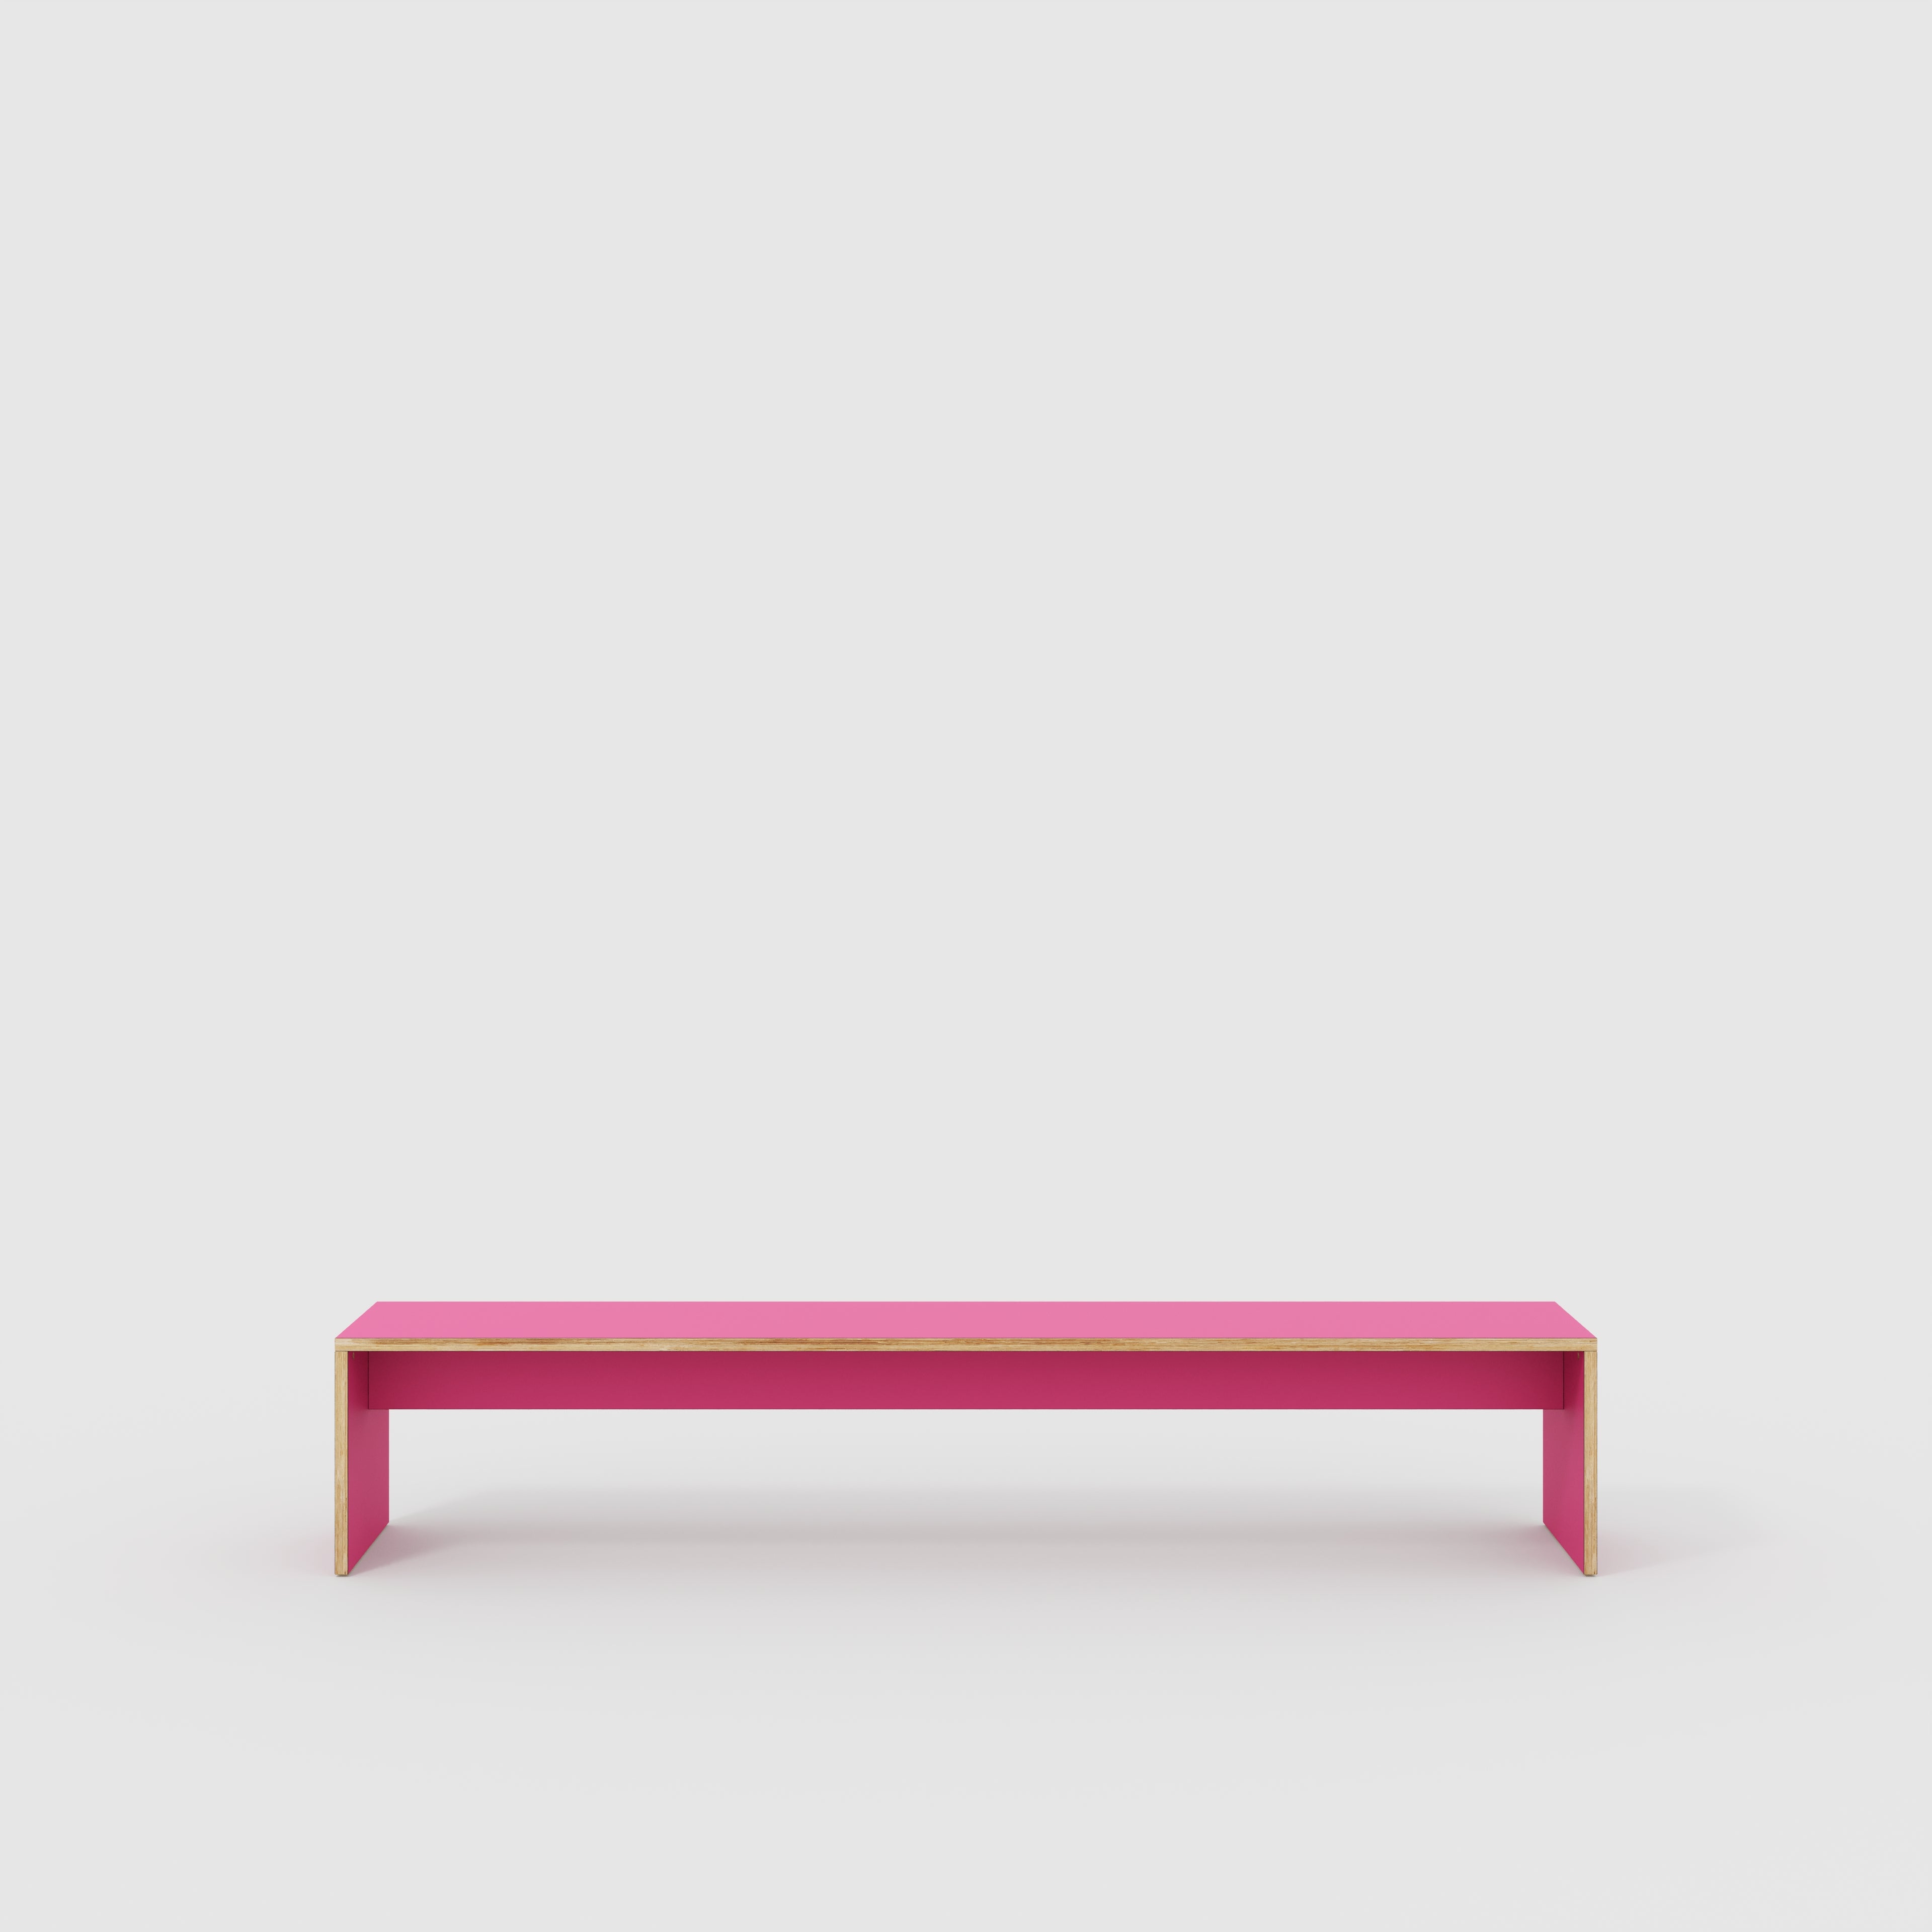 Bench Seat with Solid Sides - Formica Juicy Pink - 2400(w) x 400(d)